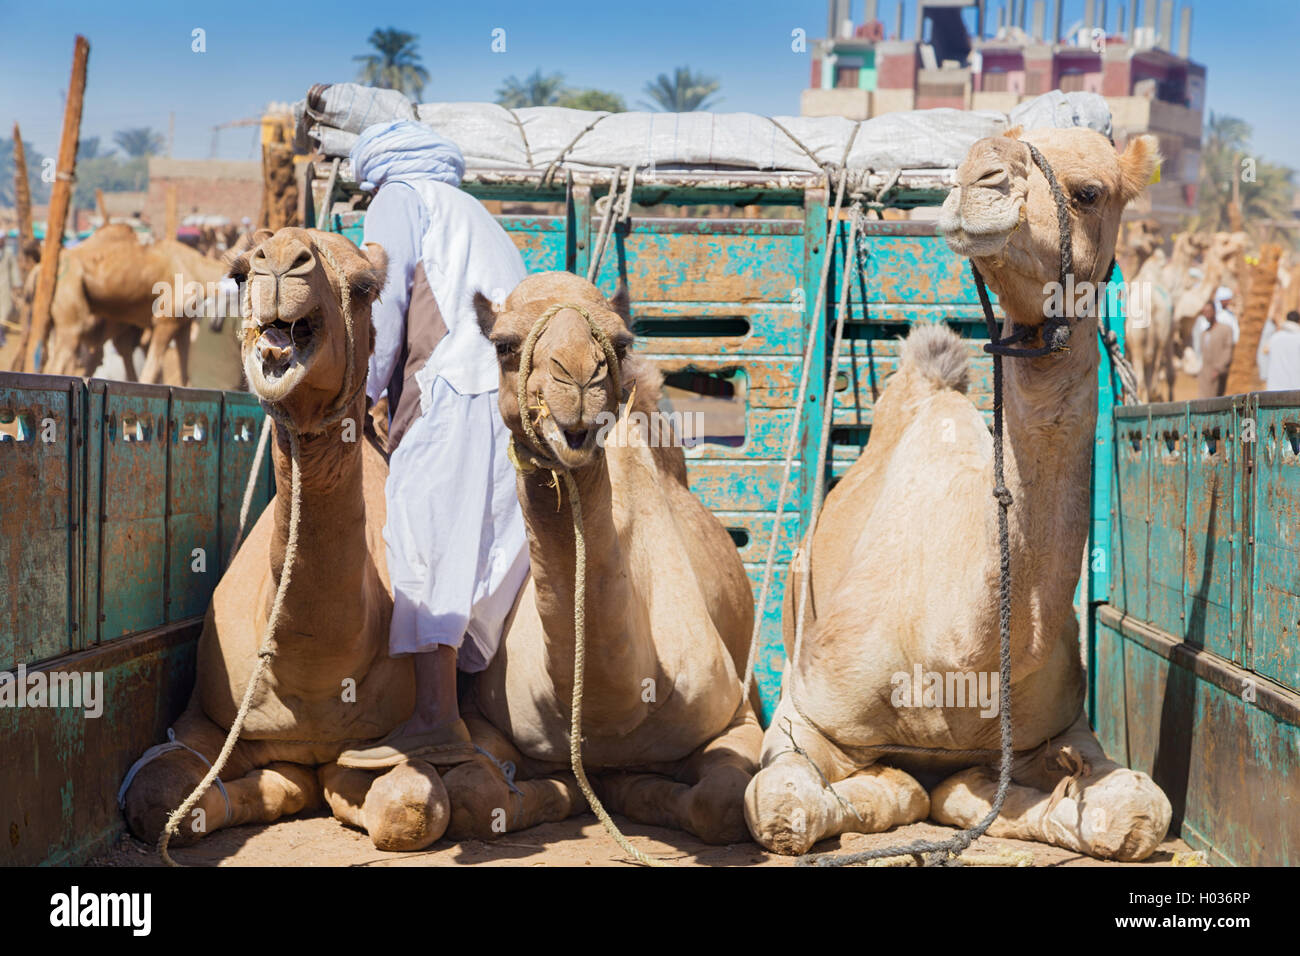 Camels on the back of truck on Camel Market in Daraw, Egypt. Stock Photo